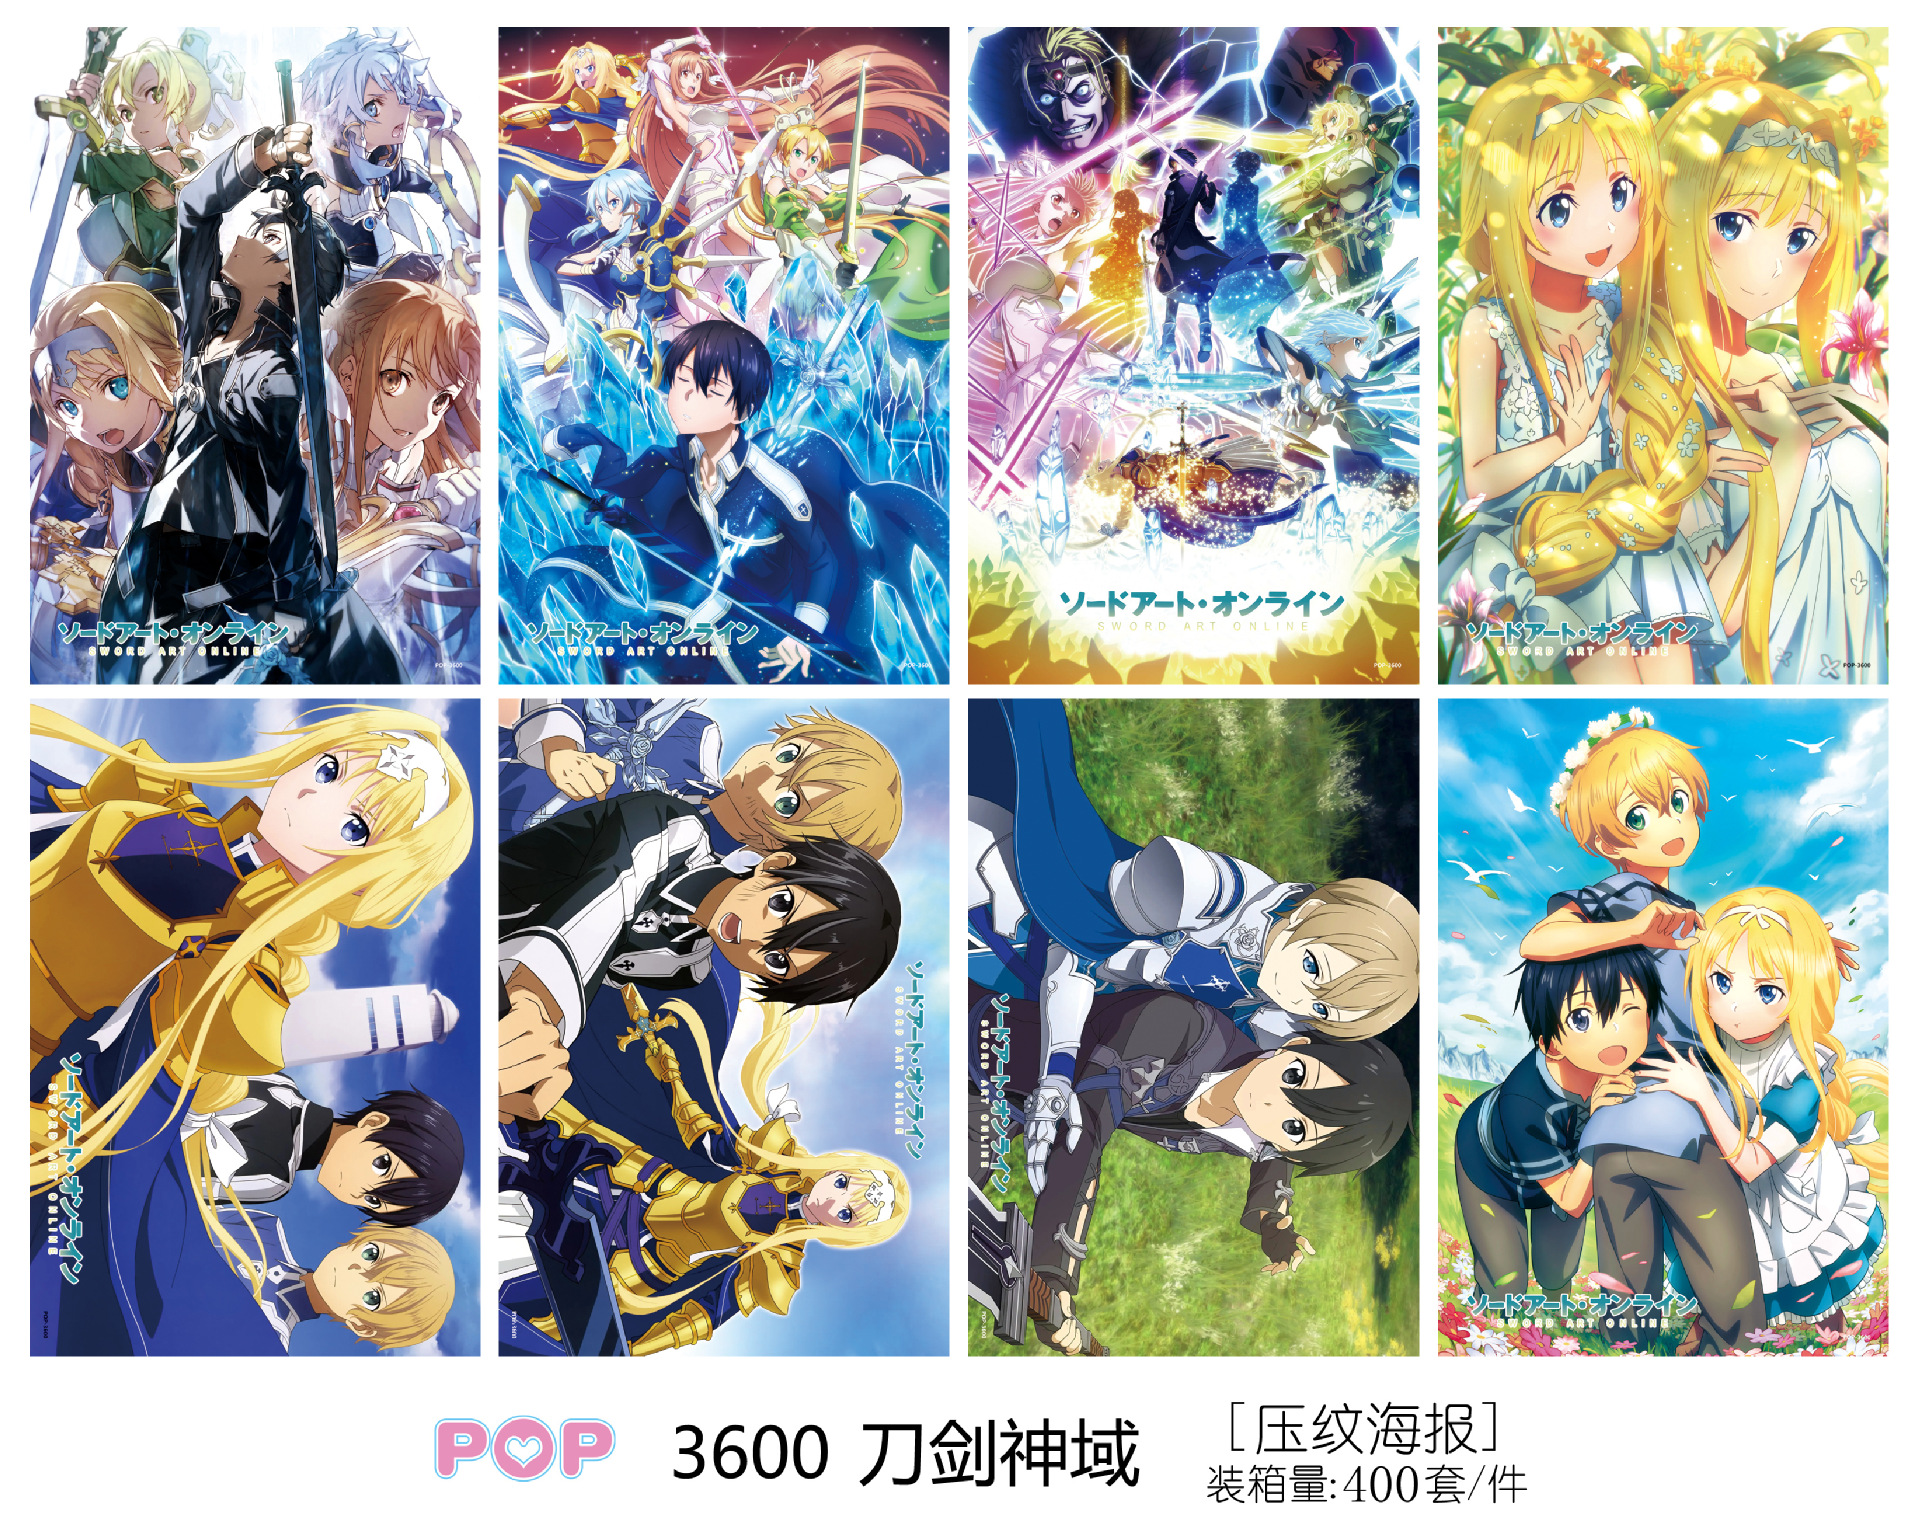 sword art online anime poster price for a set of 8 pcs